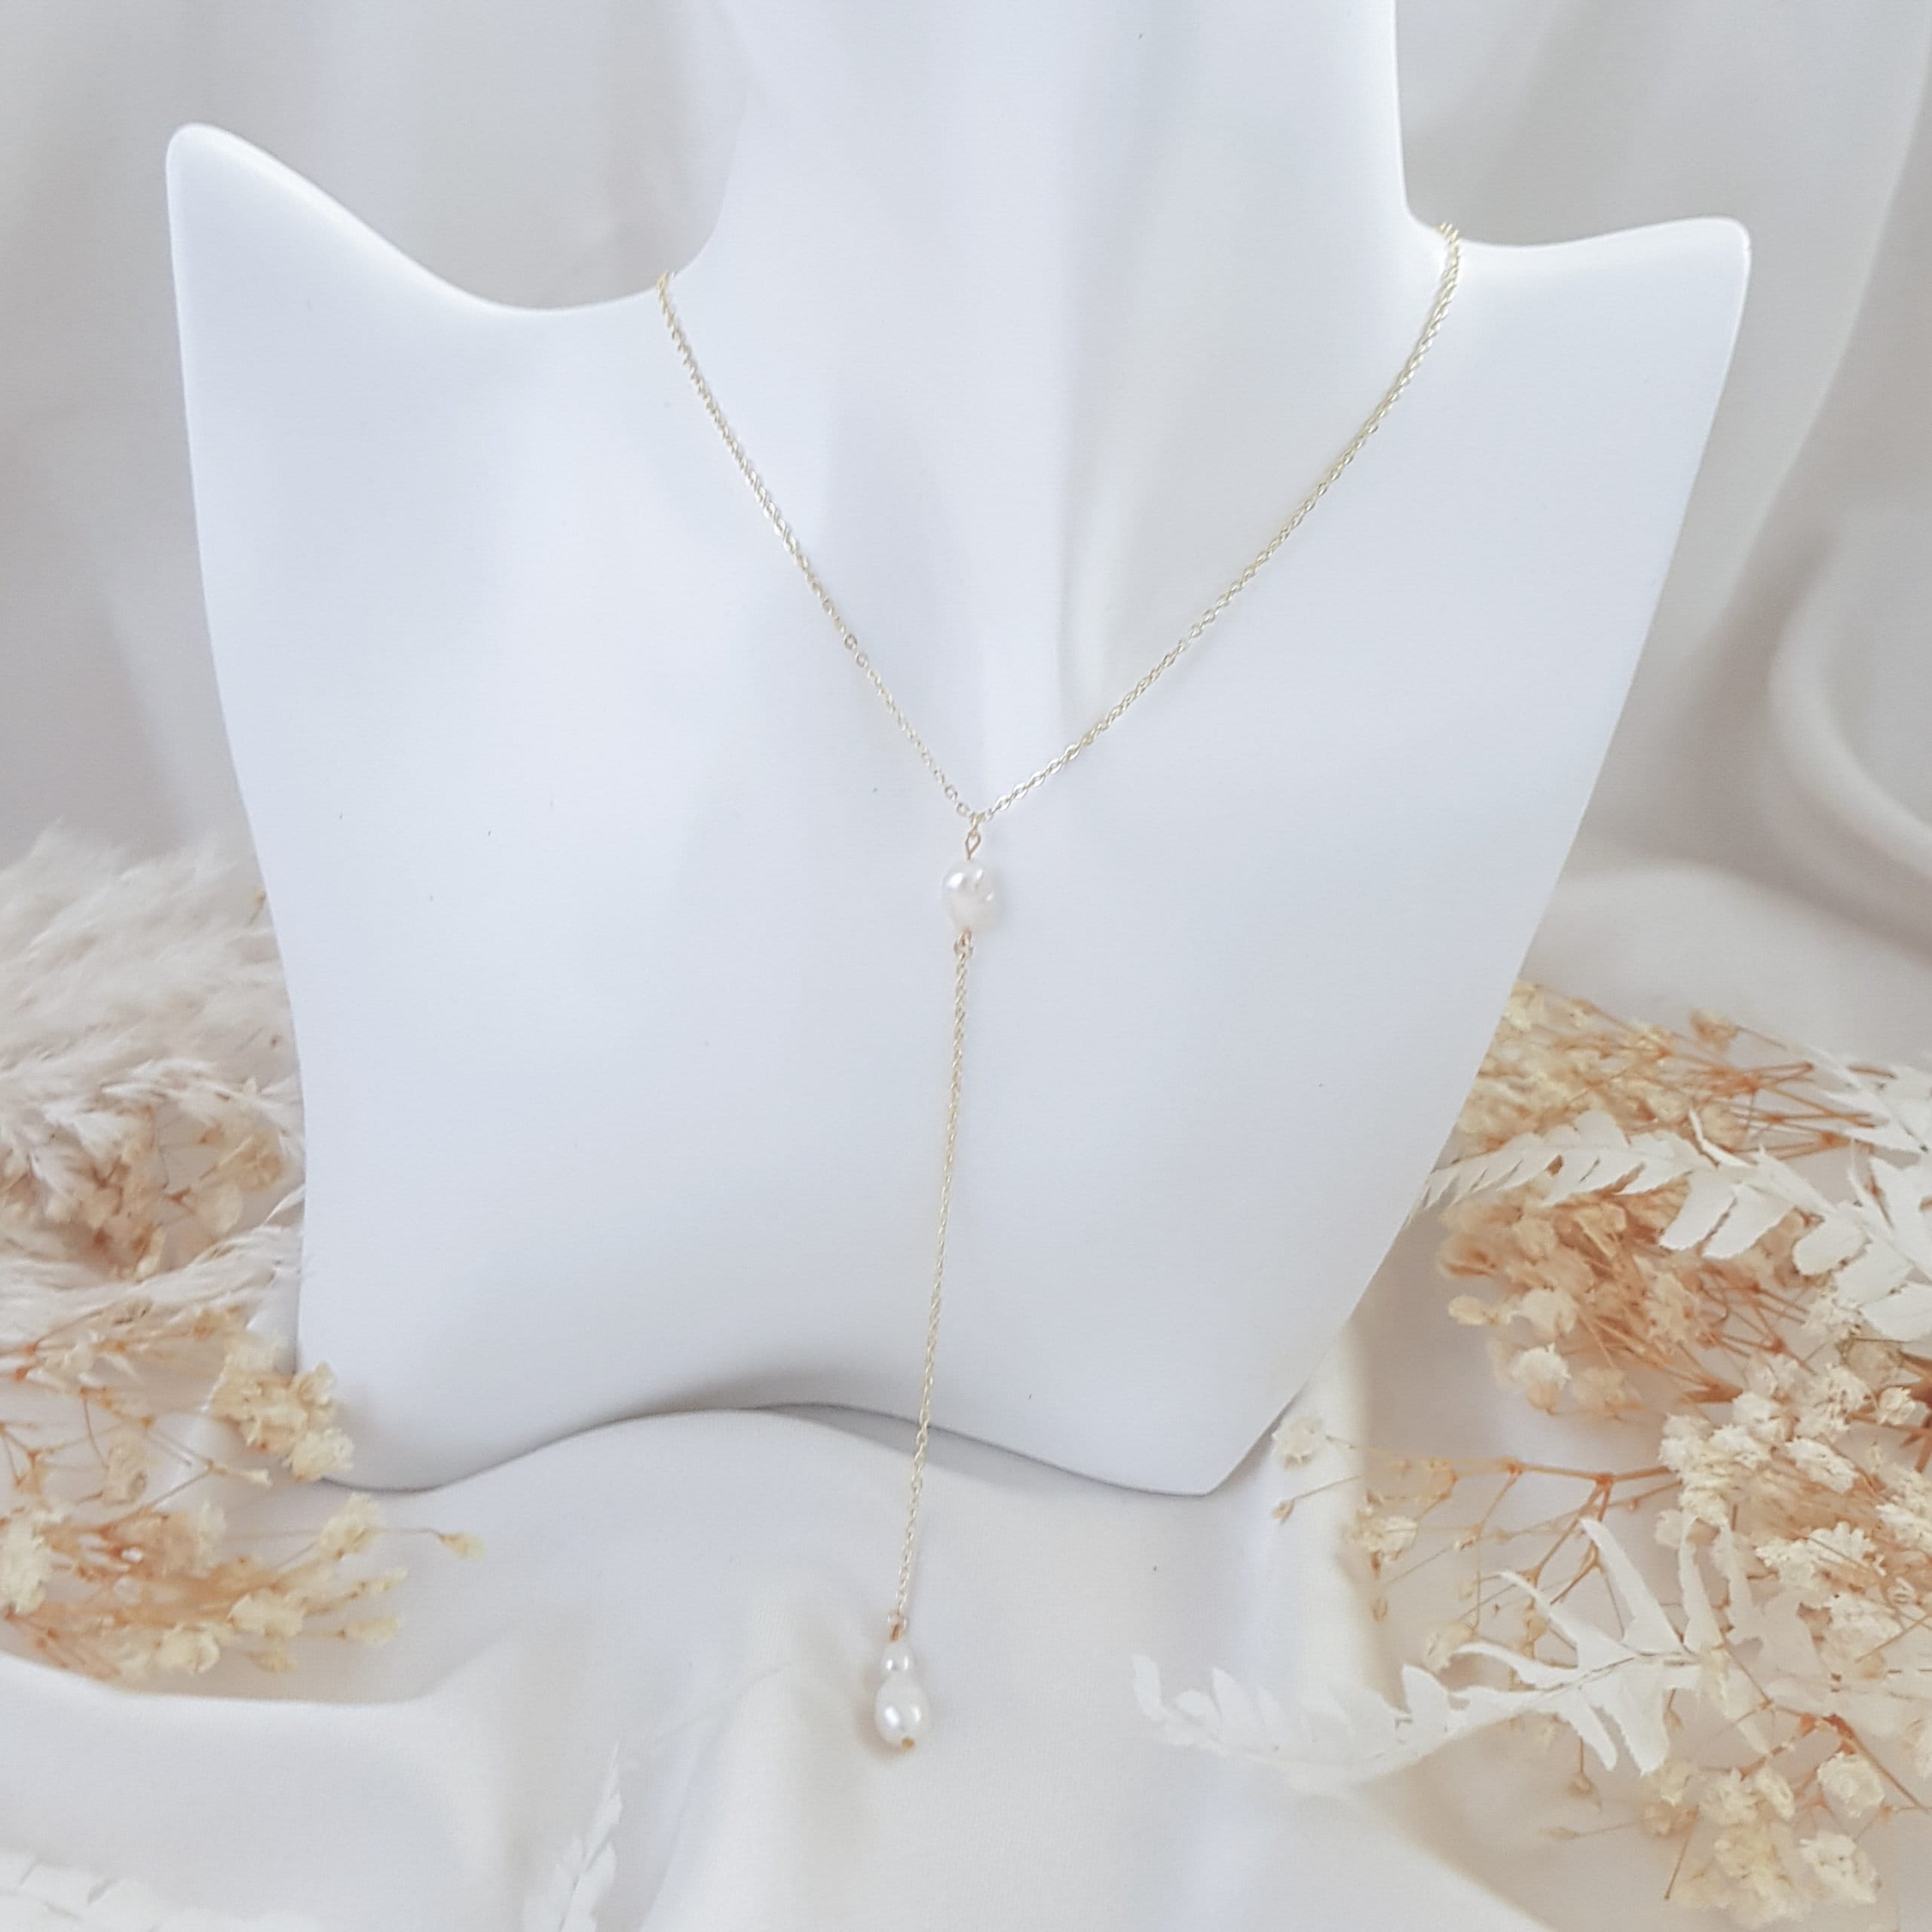 Freshwater pearl bridal lariat necklace, Gold pearl drop wedding necklace, Dainty elegant necklace, Y necklace, Jewellery for brides